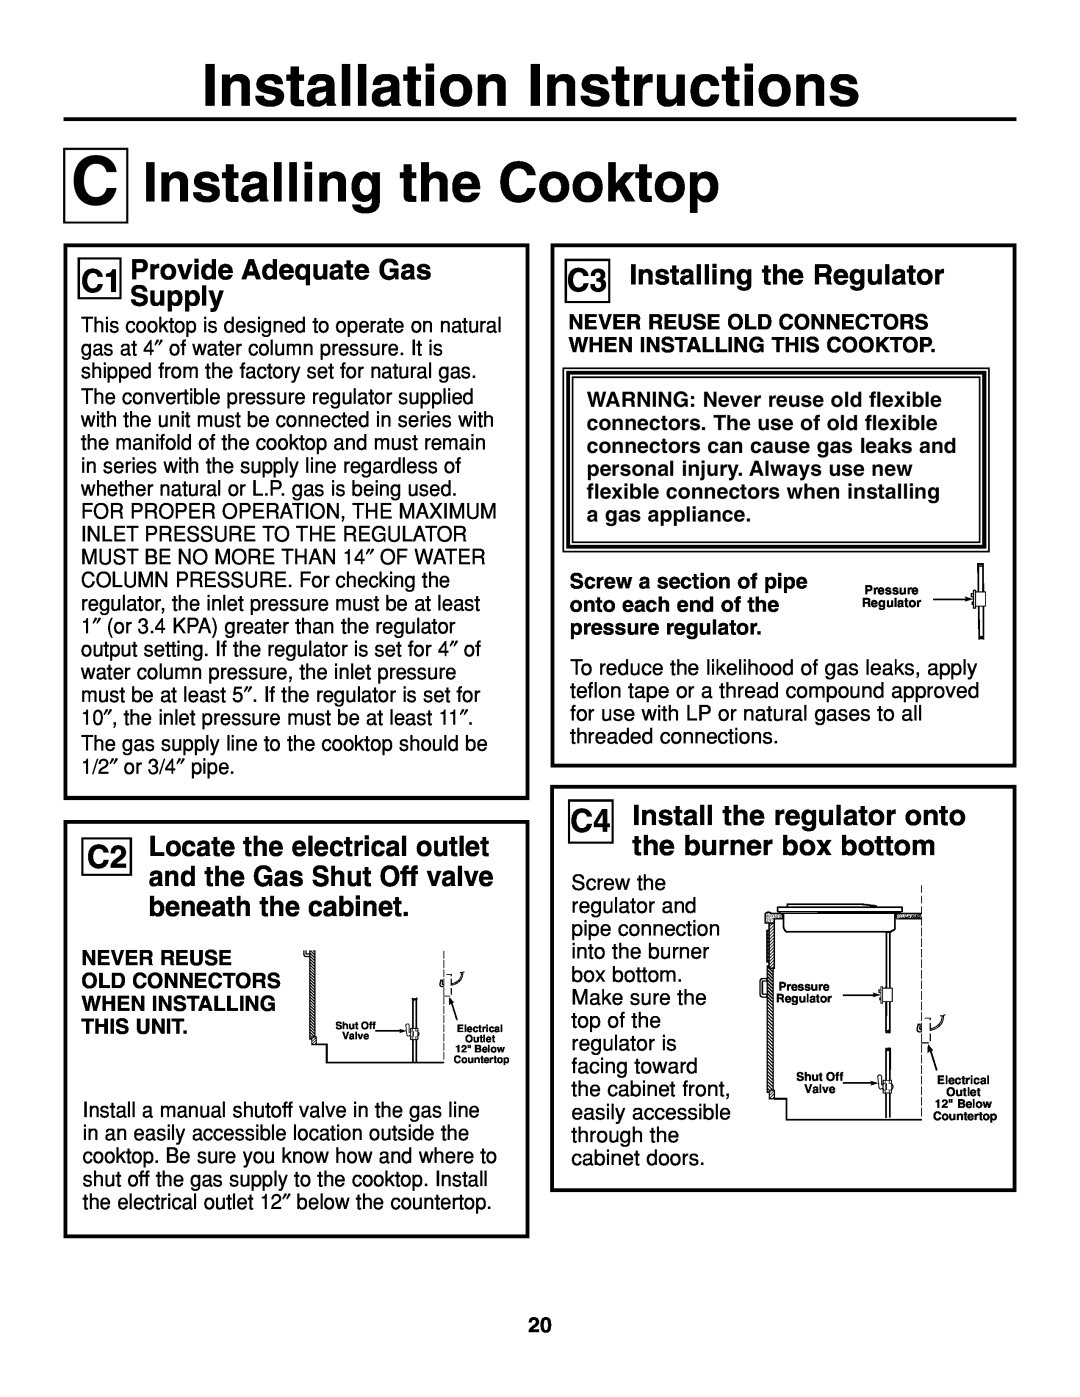 GE JGP337 C Installing the Cooktop, C1 ProvideSupply Adequate Gas, C3 Installing the Regulator, Screw a section of pipe 